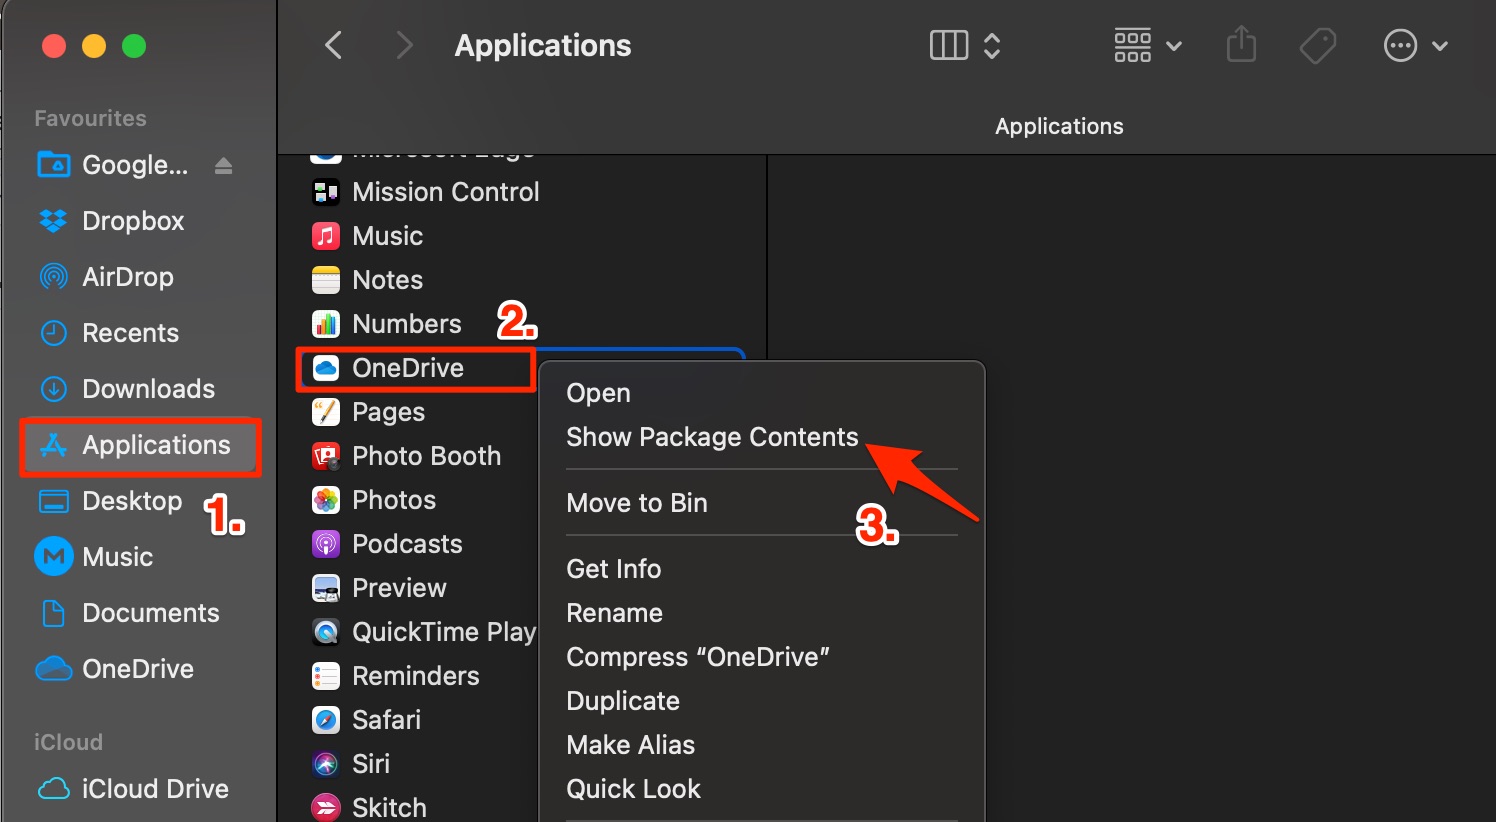 right-click OneDrive to select Show Package Contents